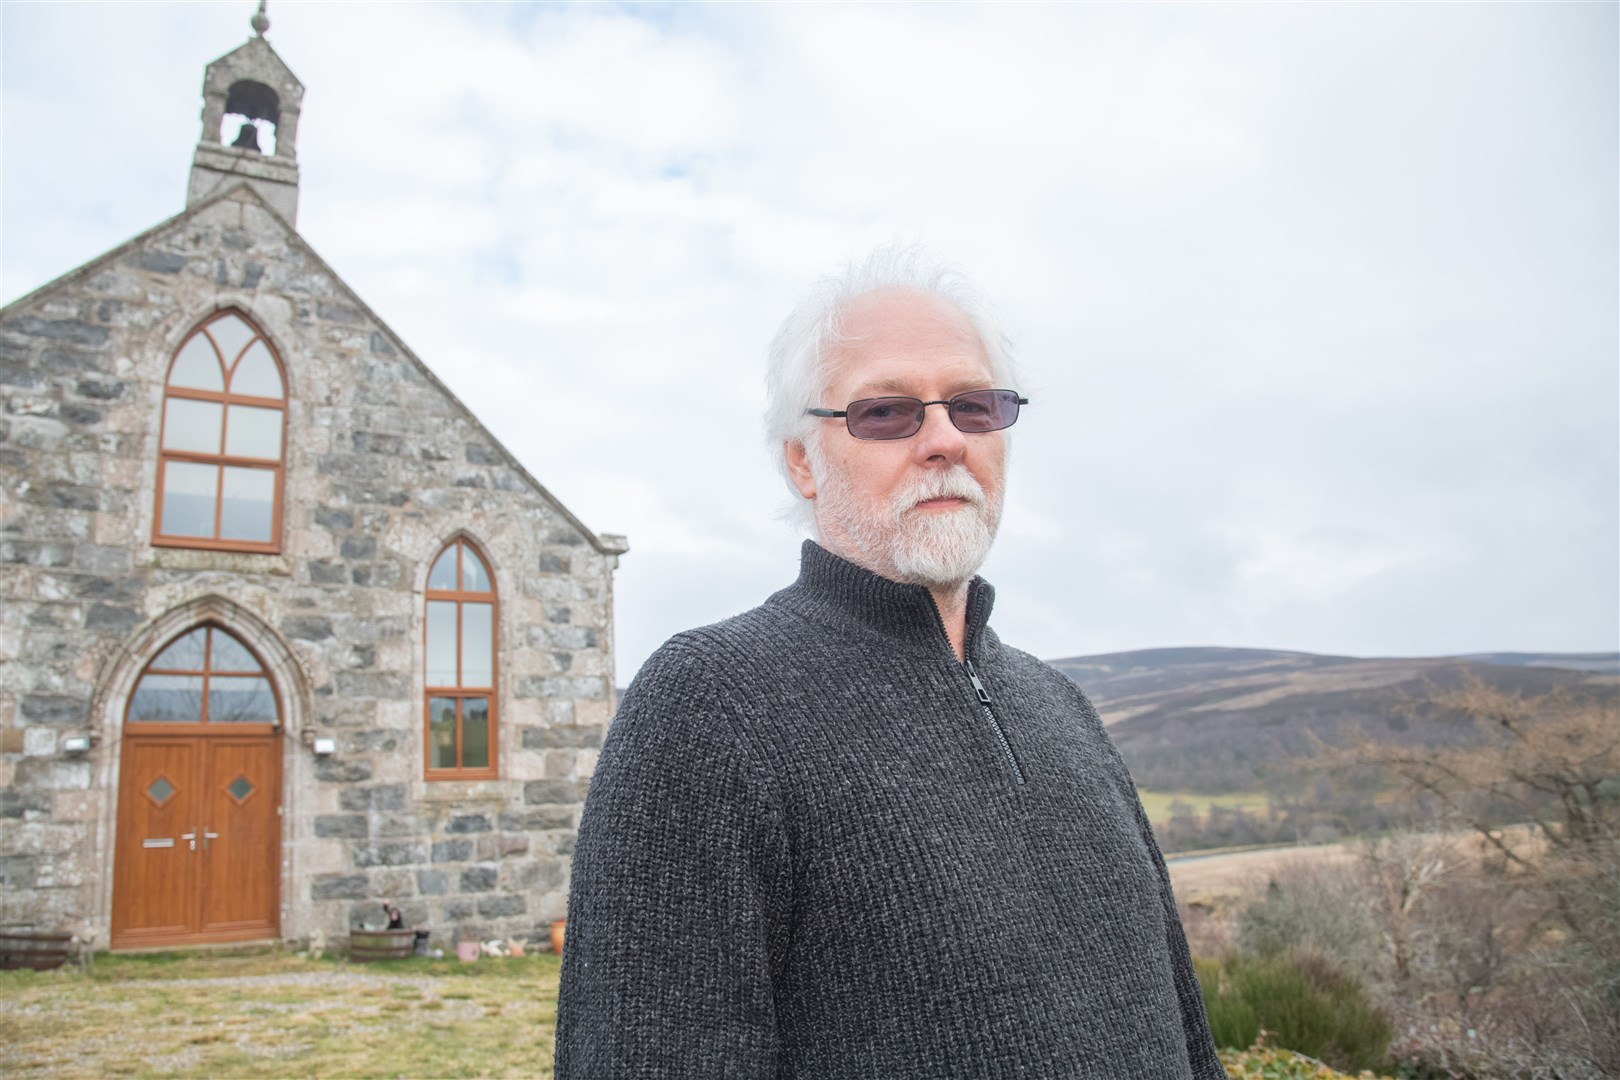 Trevor Smith, who moved to the Cabrach last year for its scenic views, says he may leave the area if further developments are consented. Picture: Daniel Forsyth